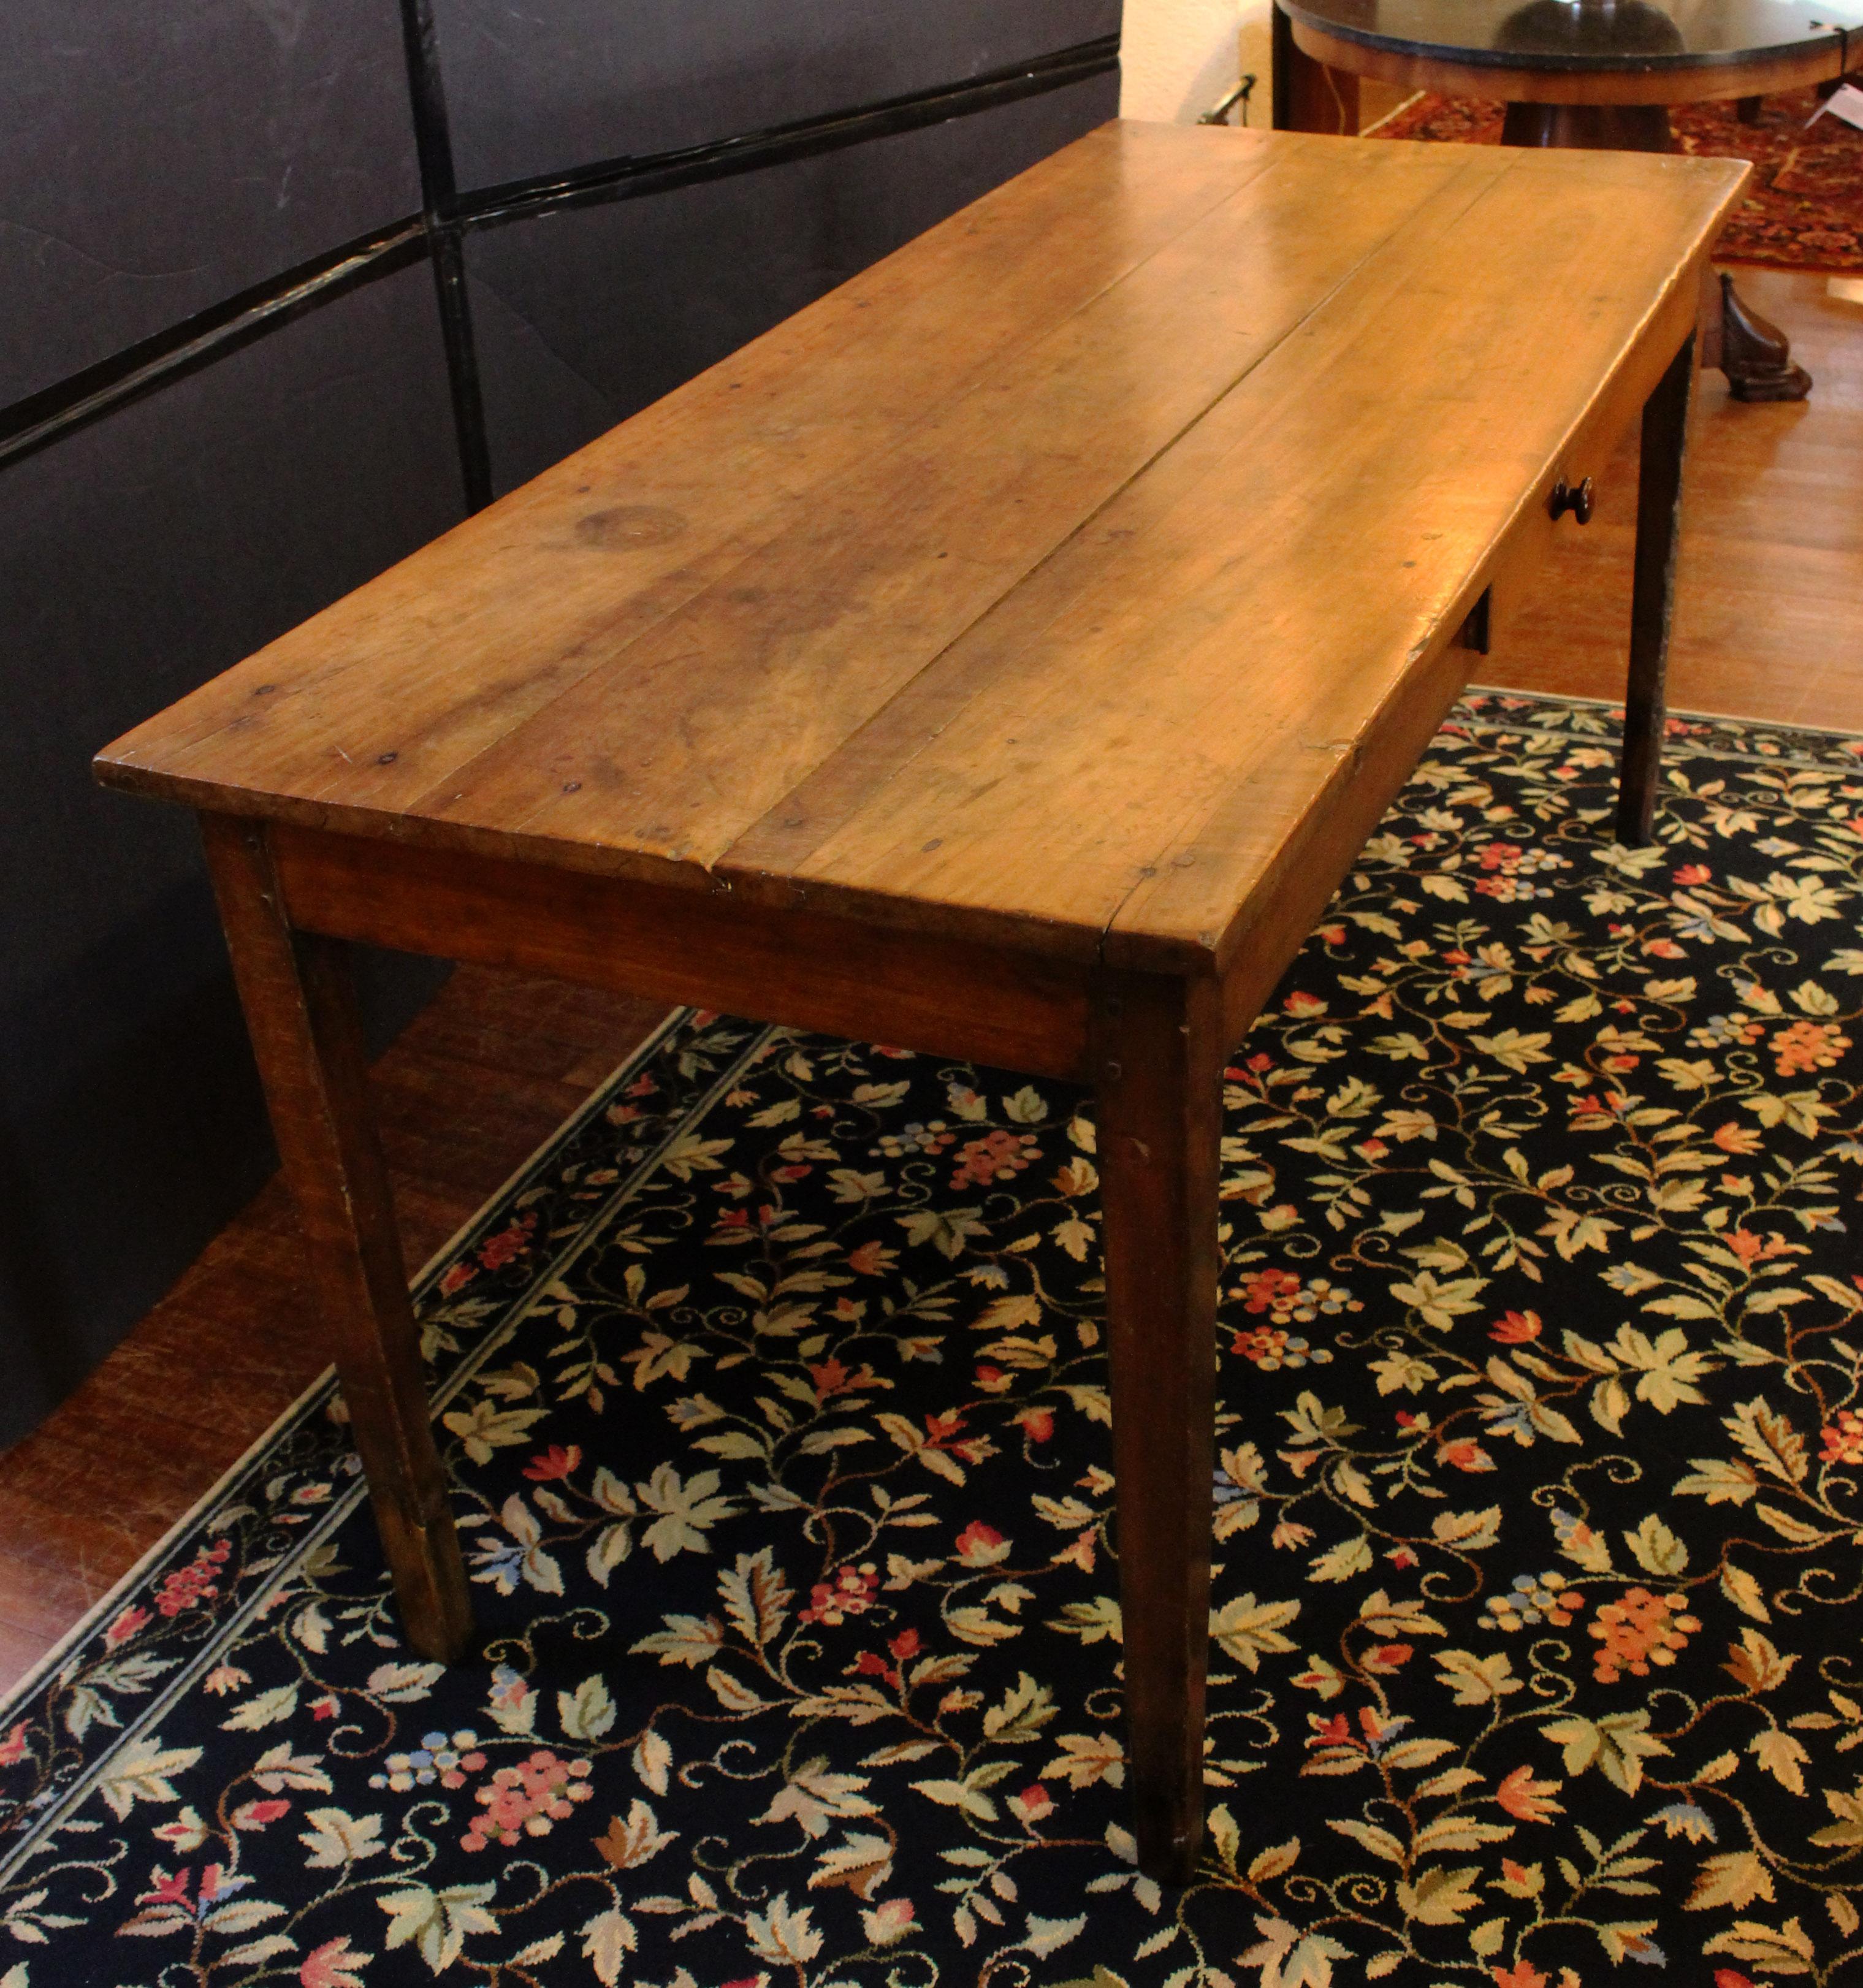 Country French farm table of fruitwood, circa 1800. Raised on square, tapered legs. Divided apron drawer with treen pull. Two-board top. Tipped feet, typical of these tables which were on stone floors for centuries. Family provenance: purchased in